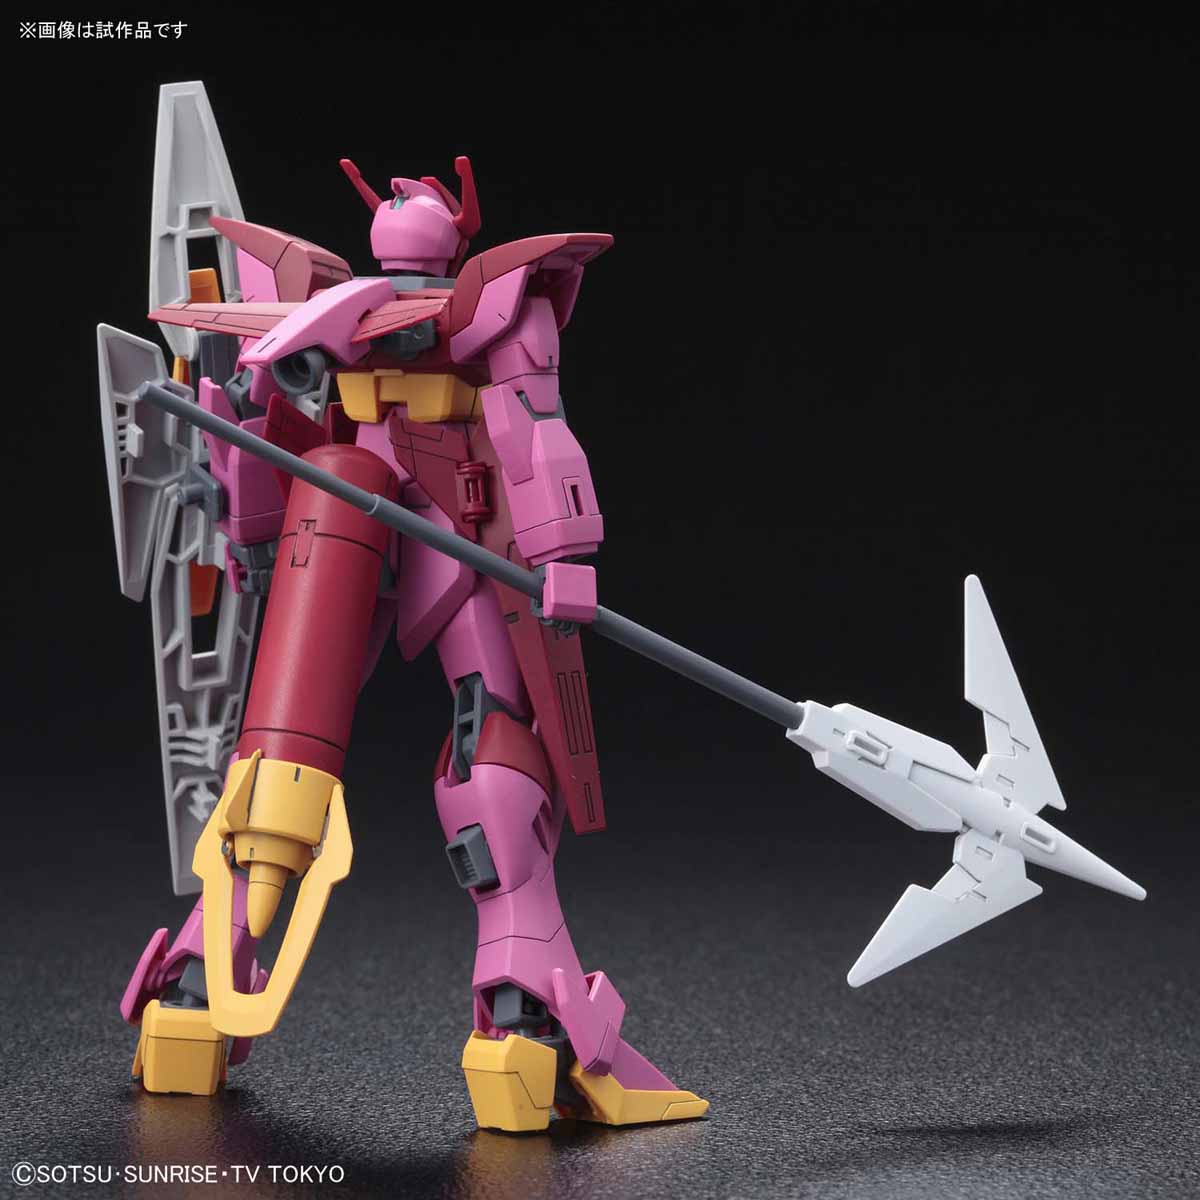 HGBD 1/144 Impulse Gundam Lancier - Release Info, Box art and Official Images - Gundam Kits Collection News and Reviews